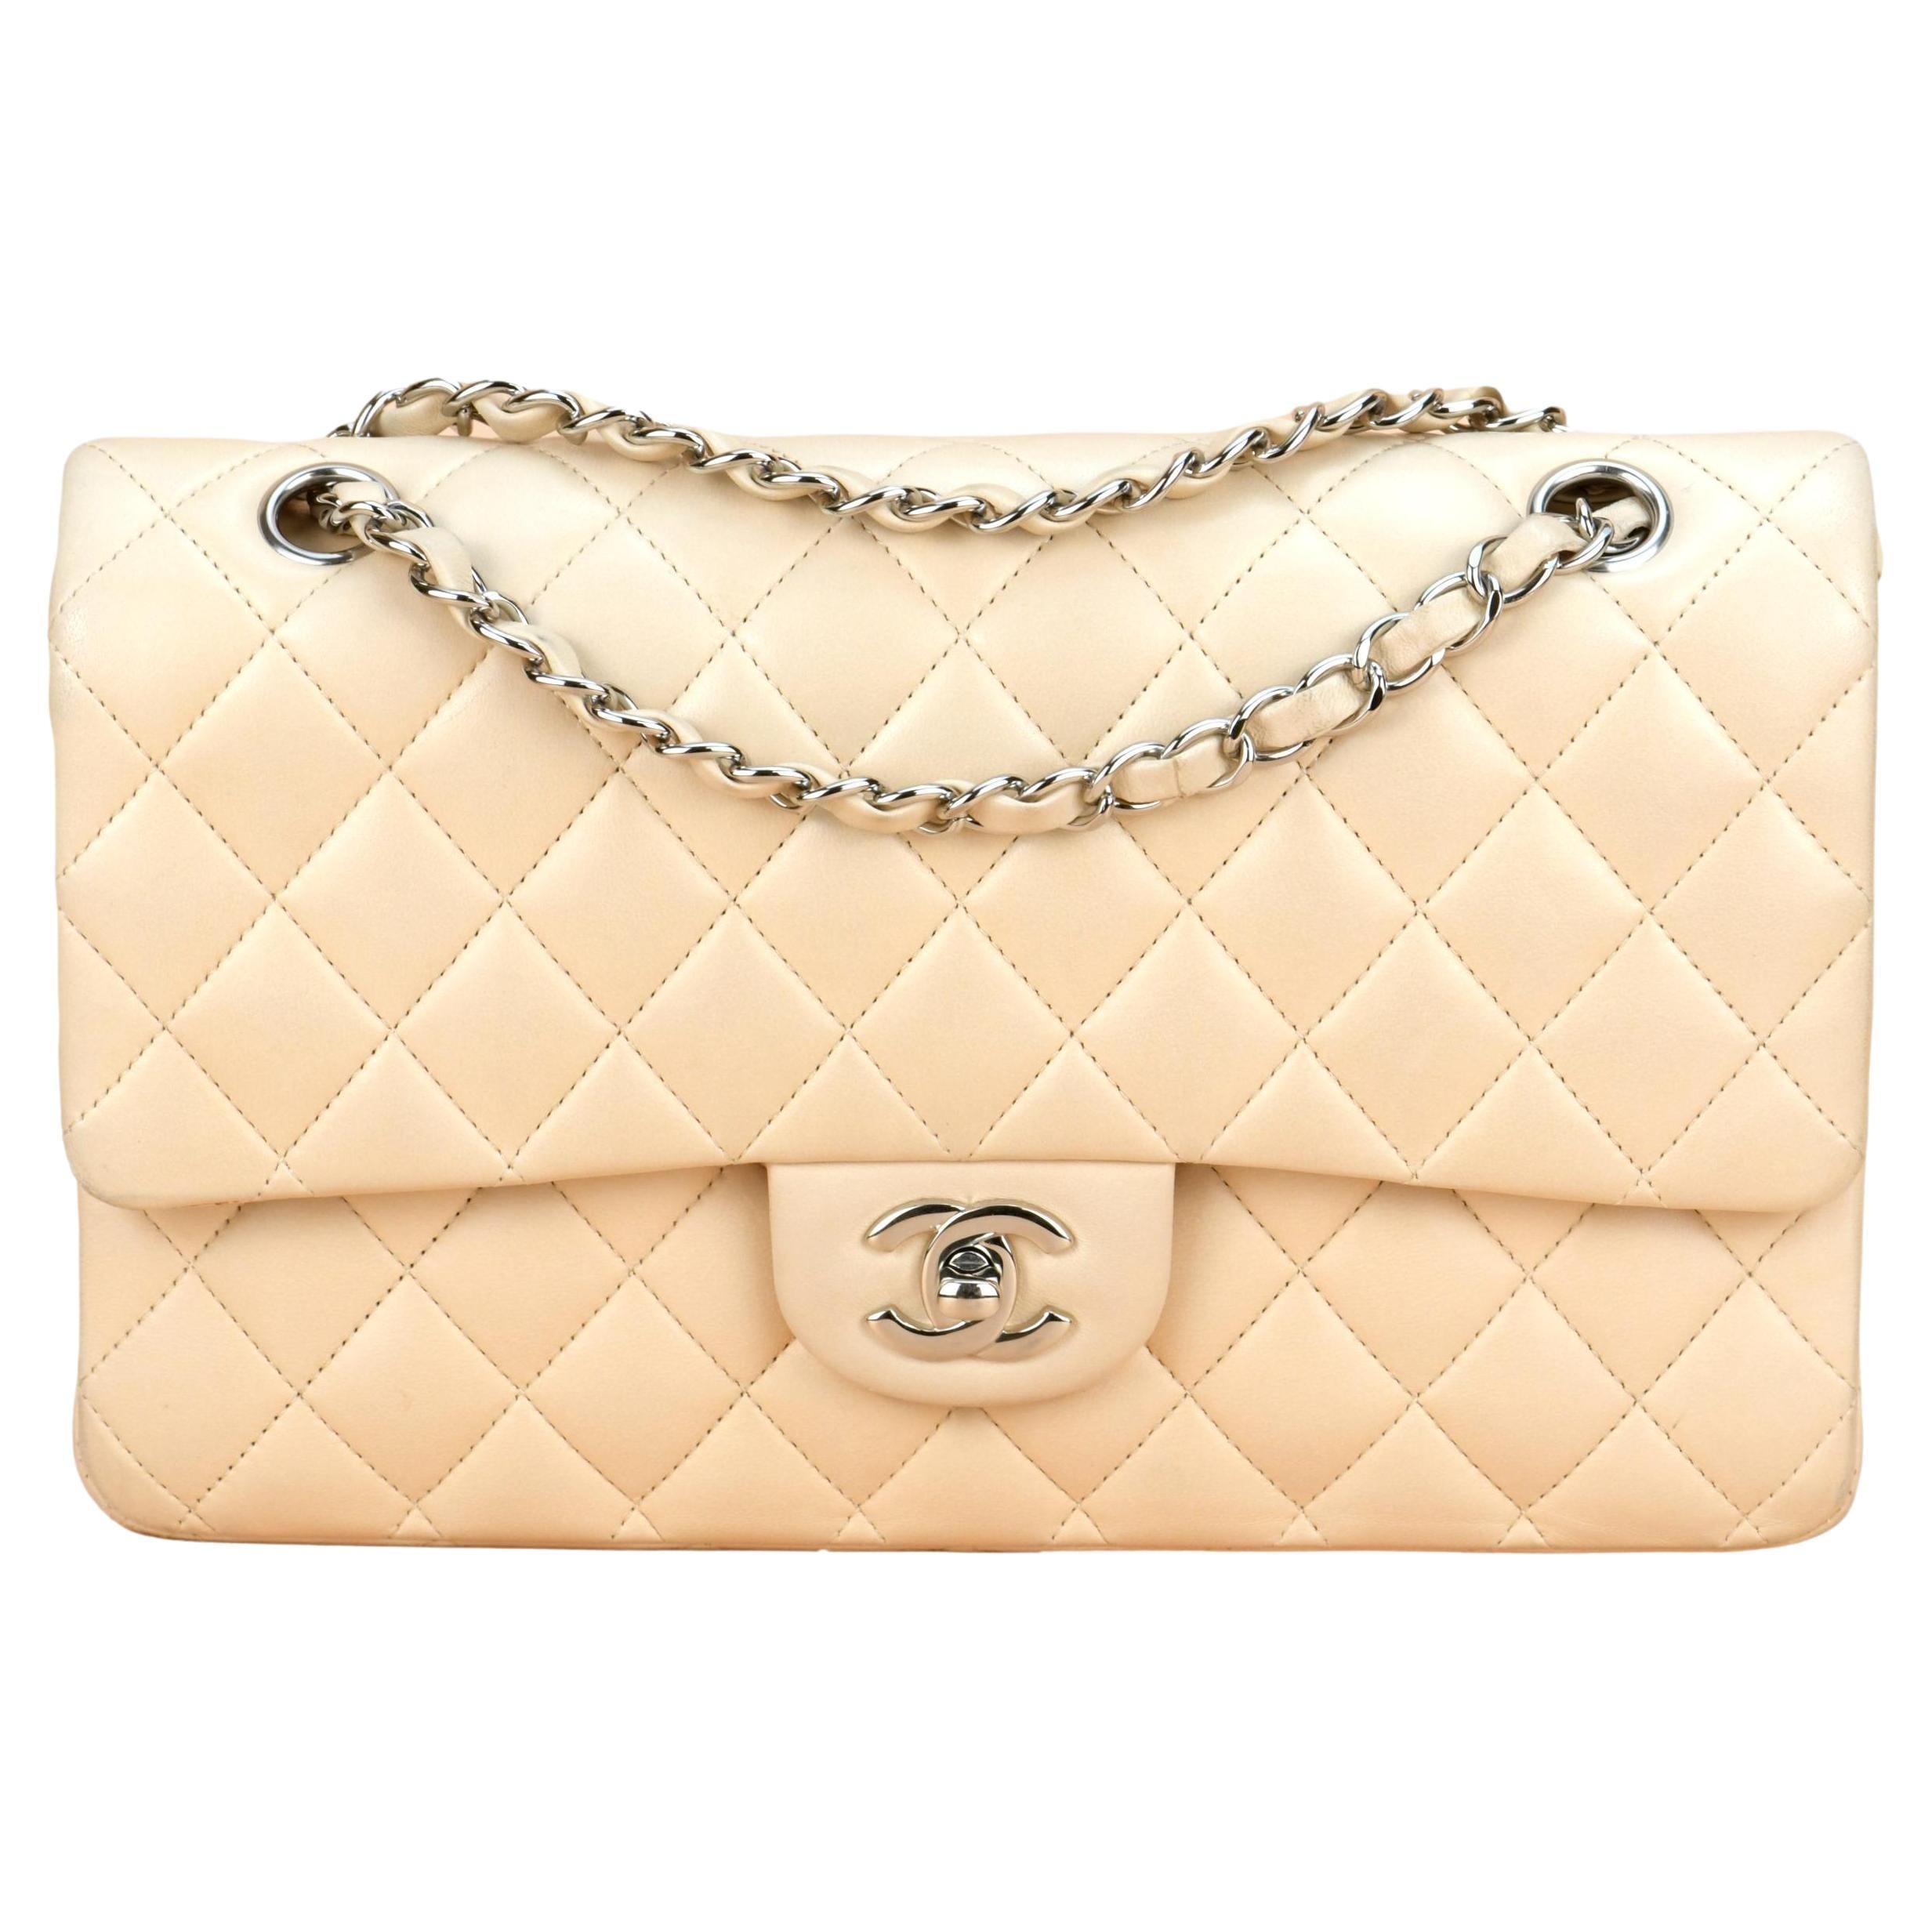 Chanel Beige Lambskin Medium Classic Double Flap Bag For Sale at